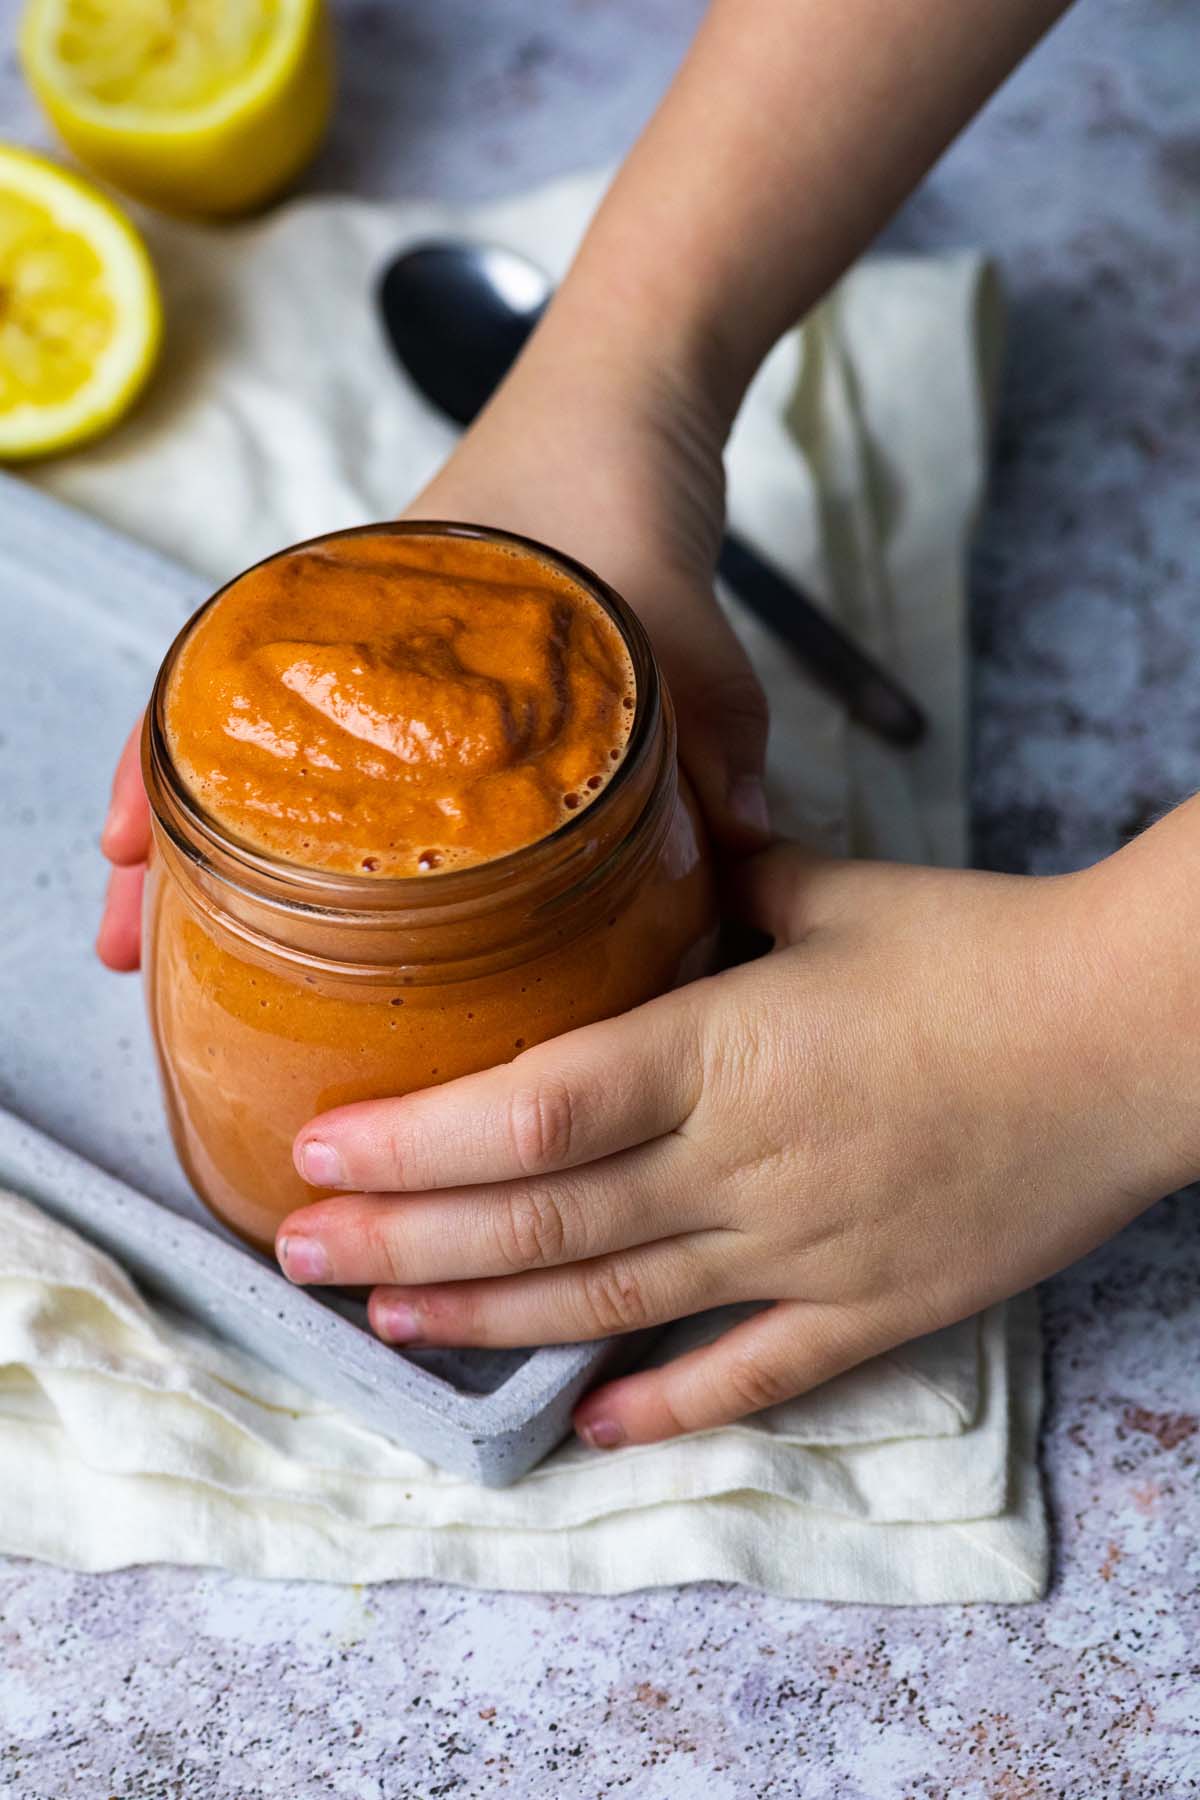 Holding a jar filled with vegan french dressing